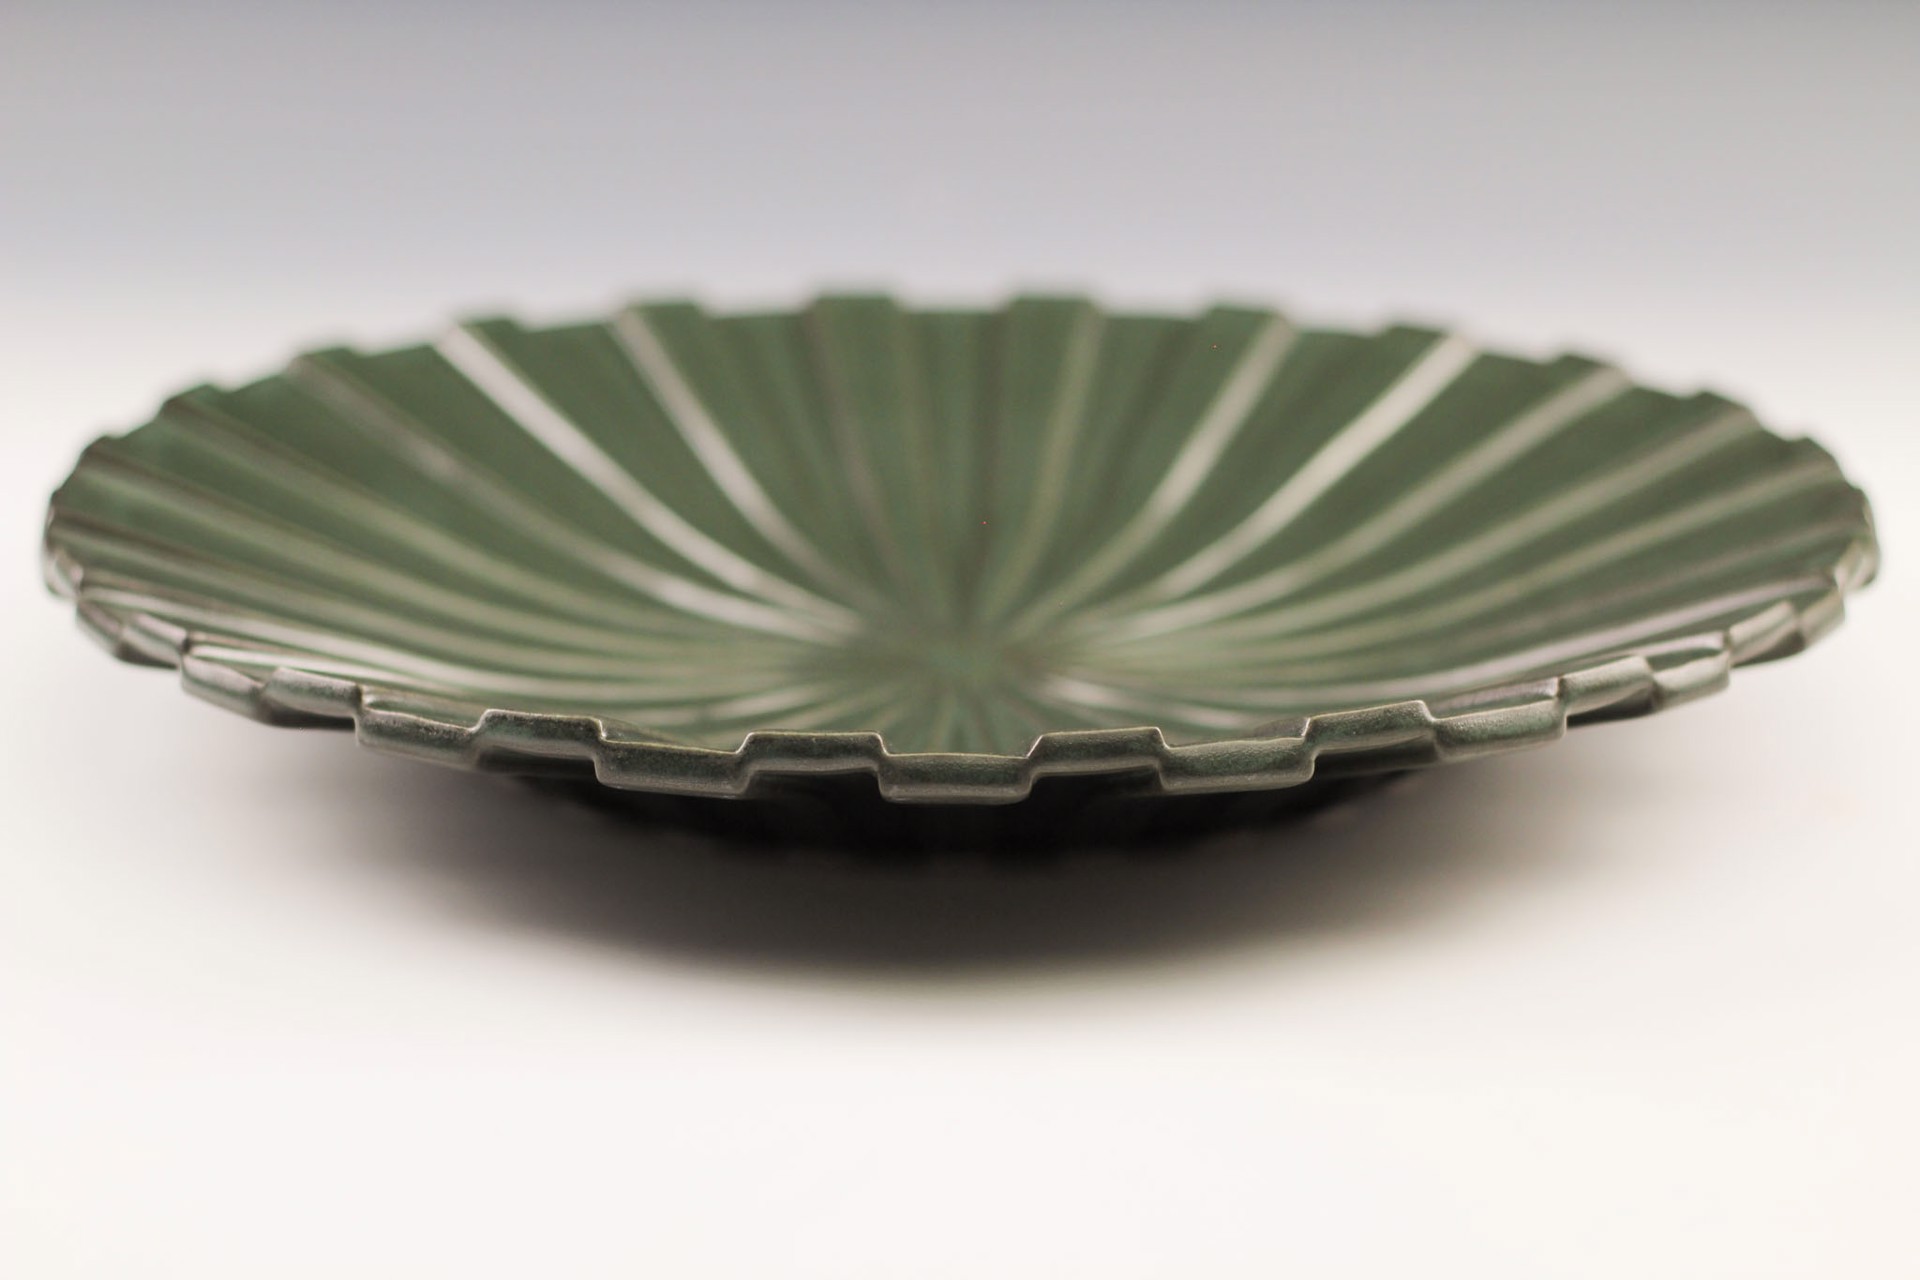 Staggered Lines Platter by Katie Bosley Sabin